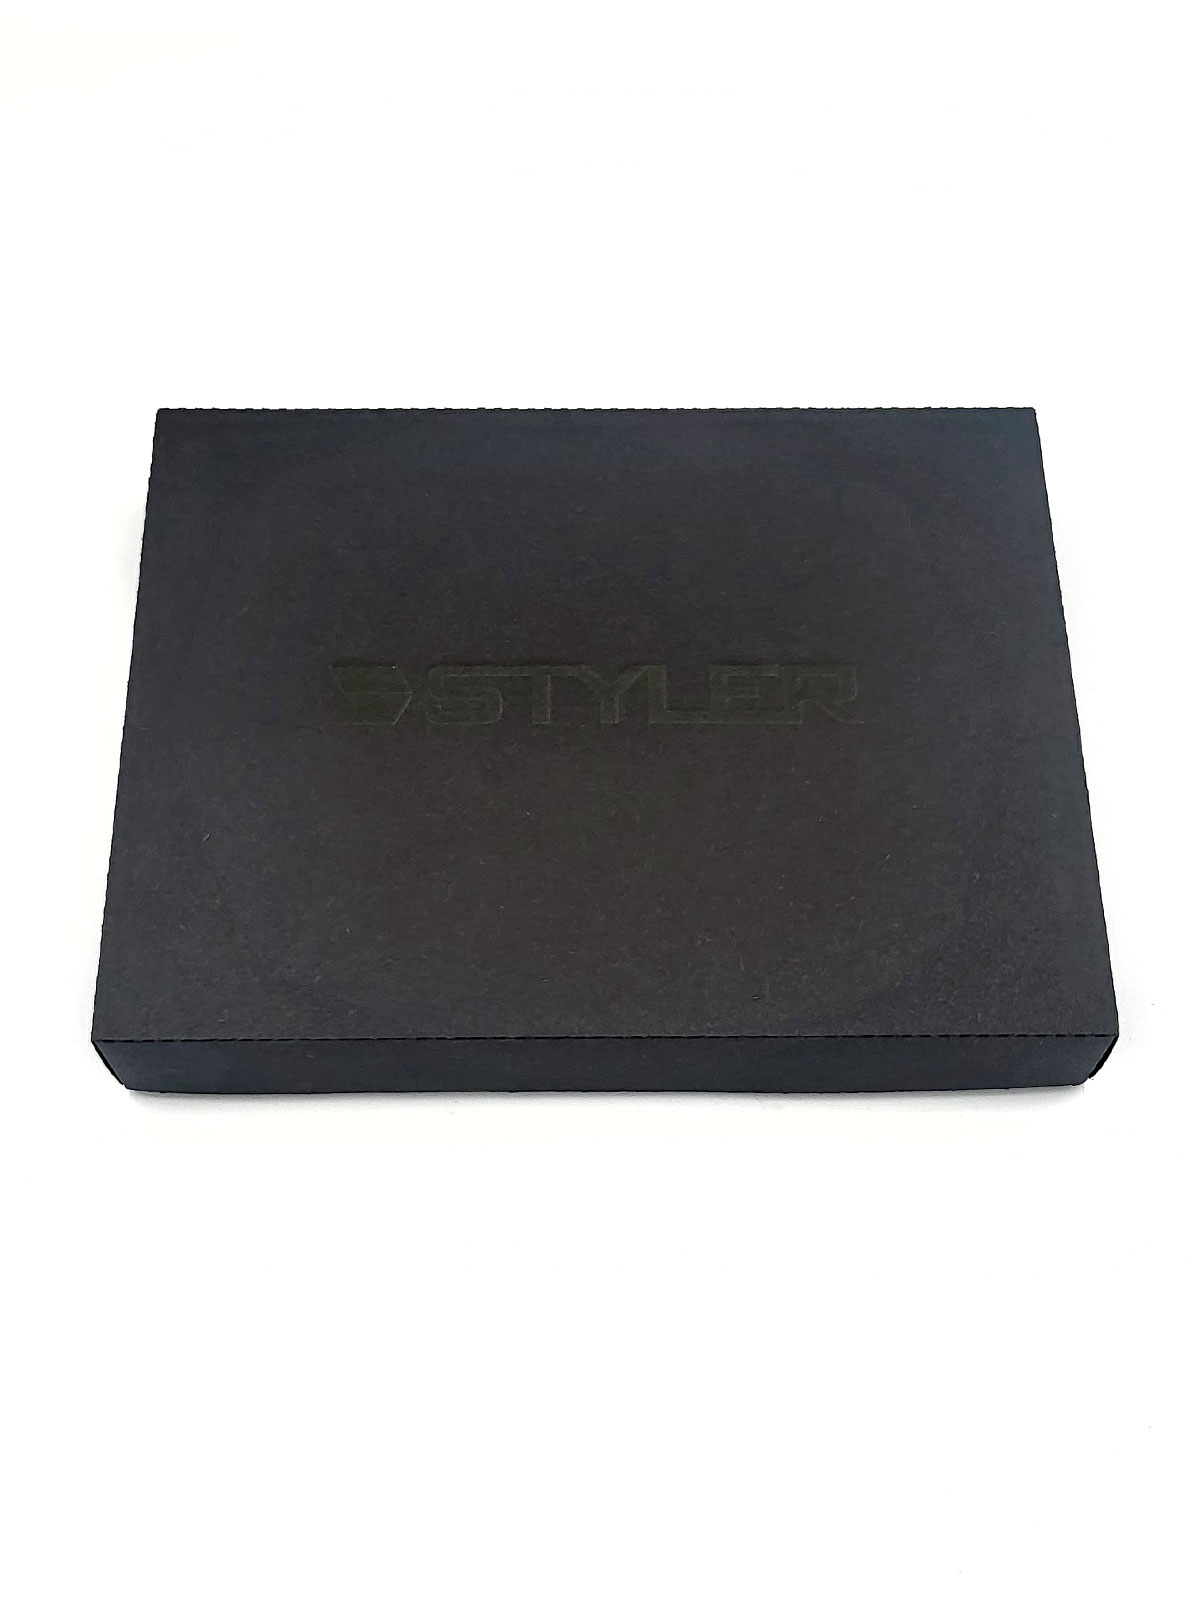 Mens wallet with three compartments - 10851 - € 50.06 img4